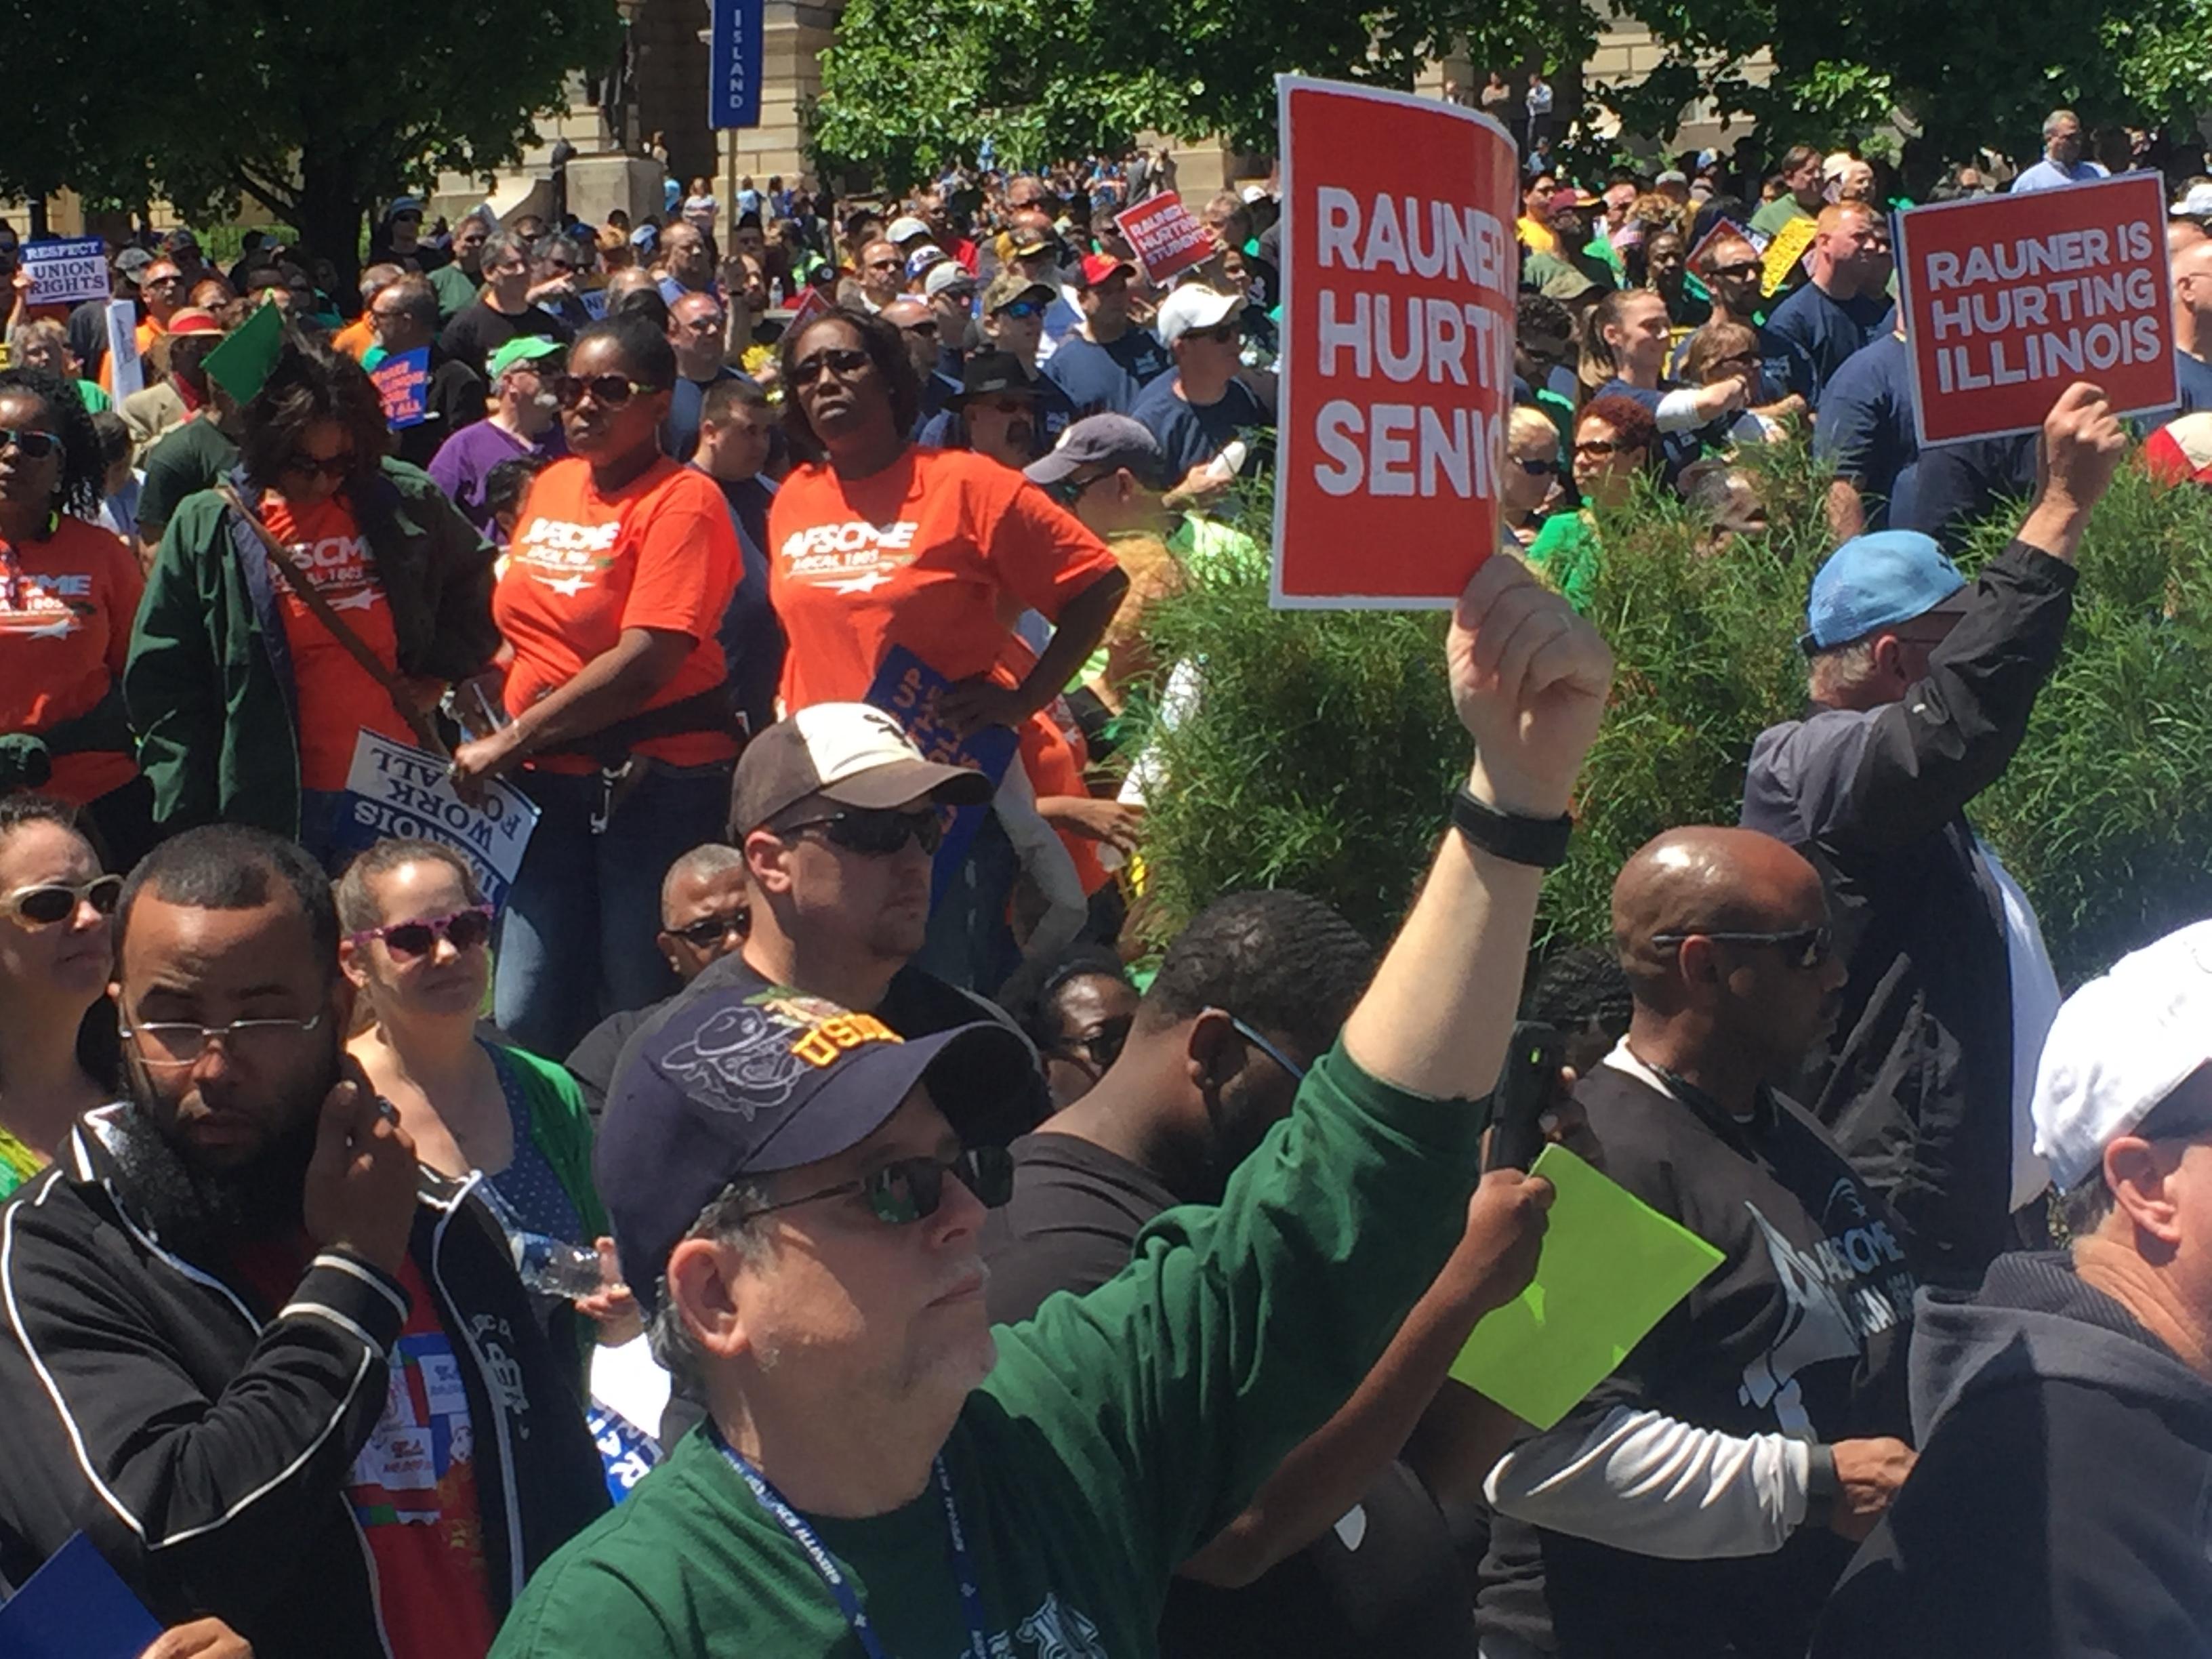 AFSCME members protest in Springfield in May 2016. (Amanda Vinicky / Chicago Tonight)